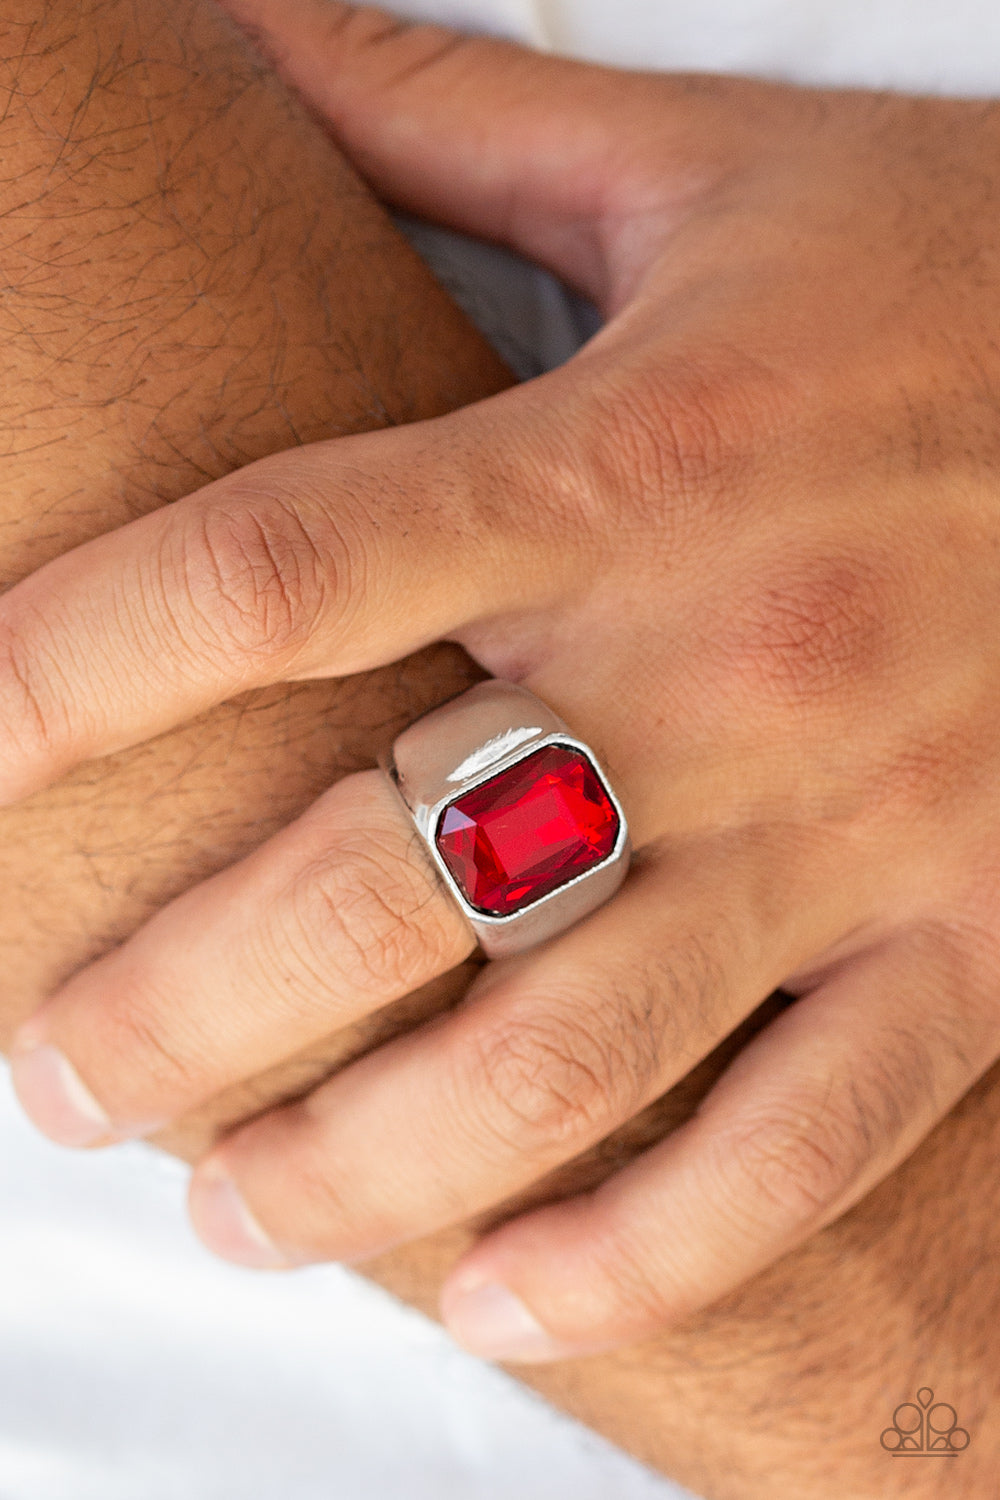 Scholar - Red Featuring a kingly emerald style cut, an oversized red rhinestone is pressed into the center of a glistening silver band for a statement look. Features a stretchy band for a flexible fit.  Sold as one individual ring.